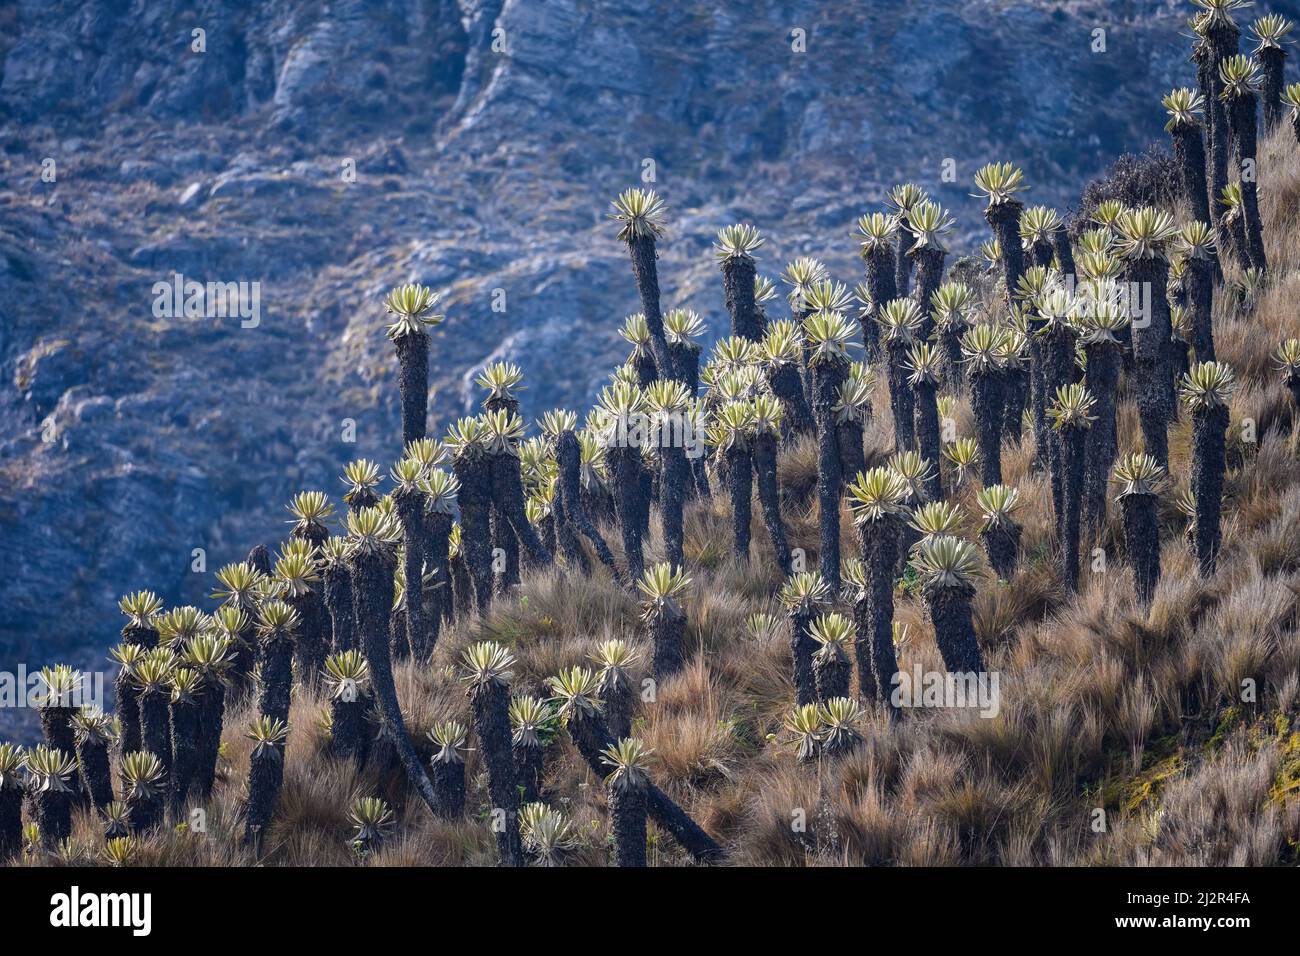 Espeletia plants in the Andes mountains. Colombia, South America. Stock Photo